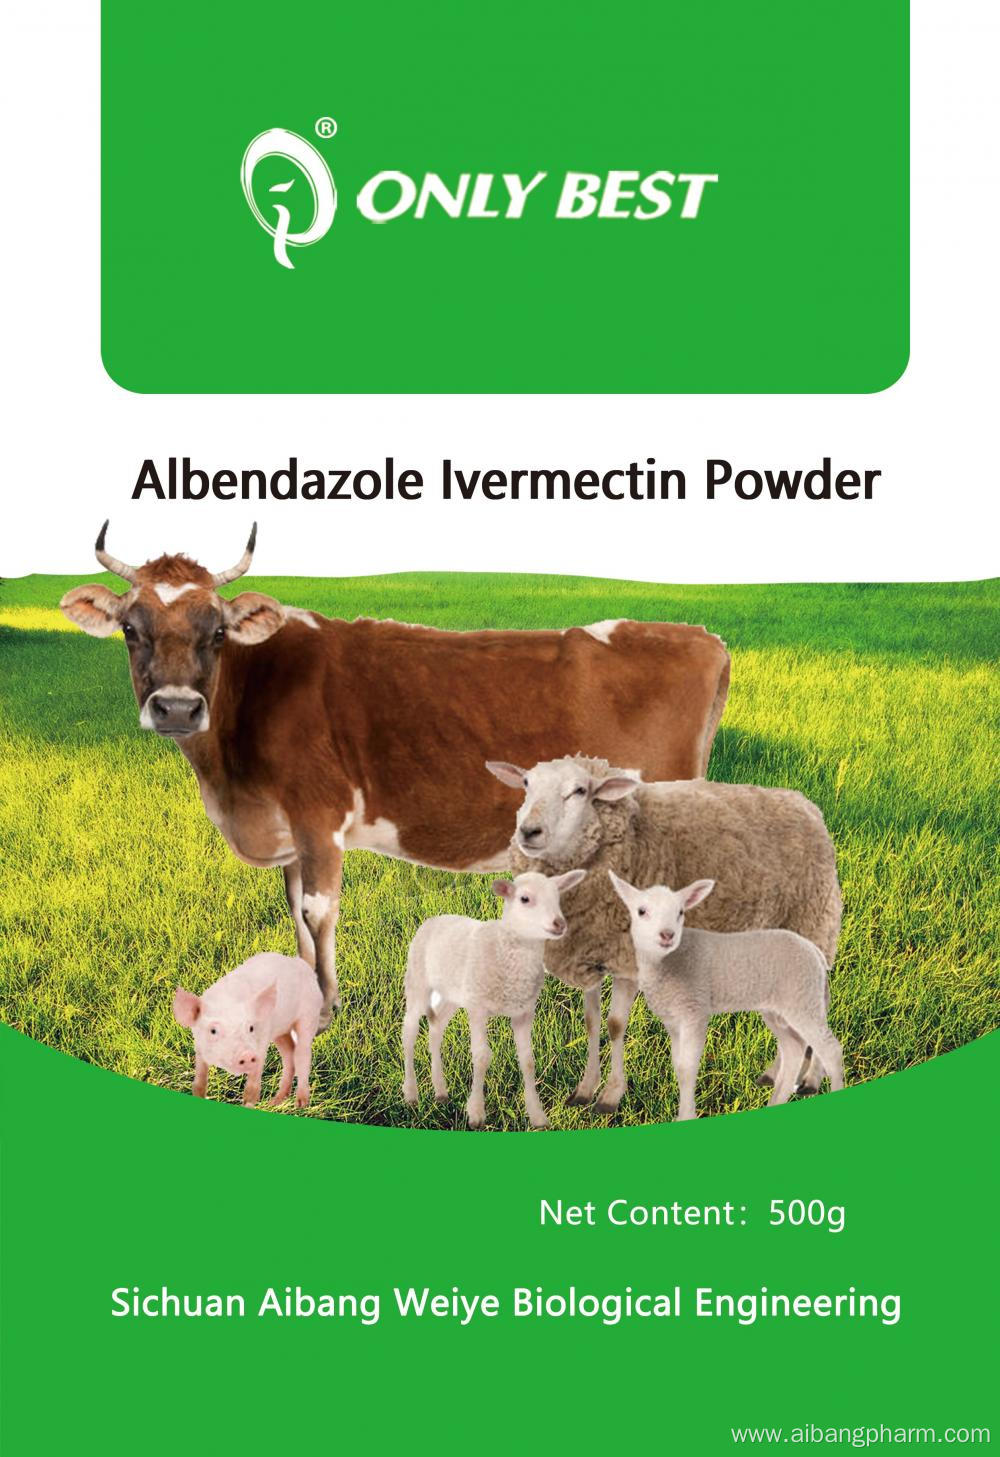 Deworming medicine for cattle and sheep